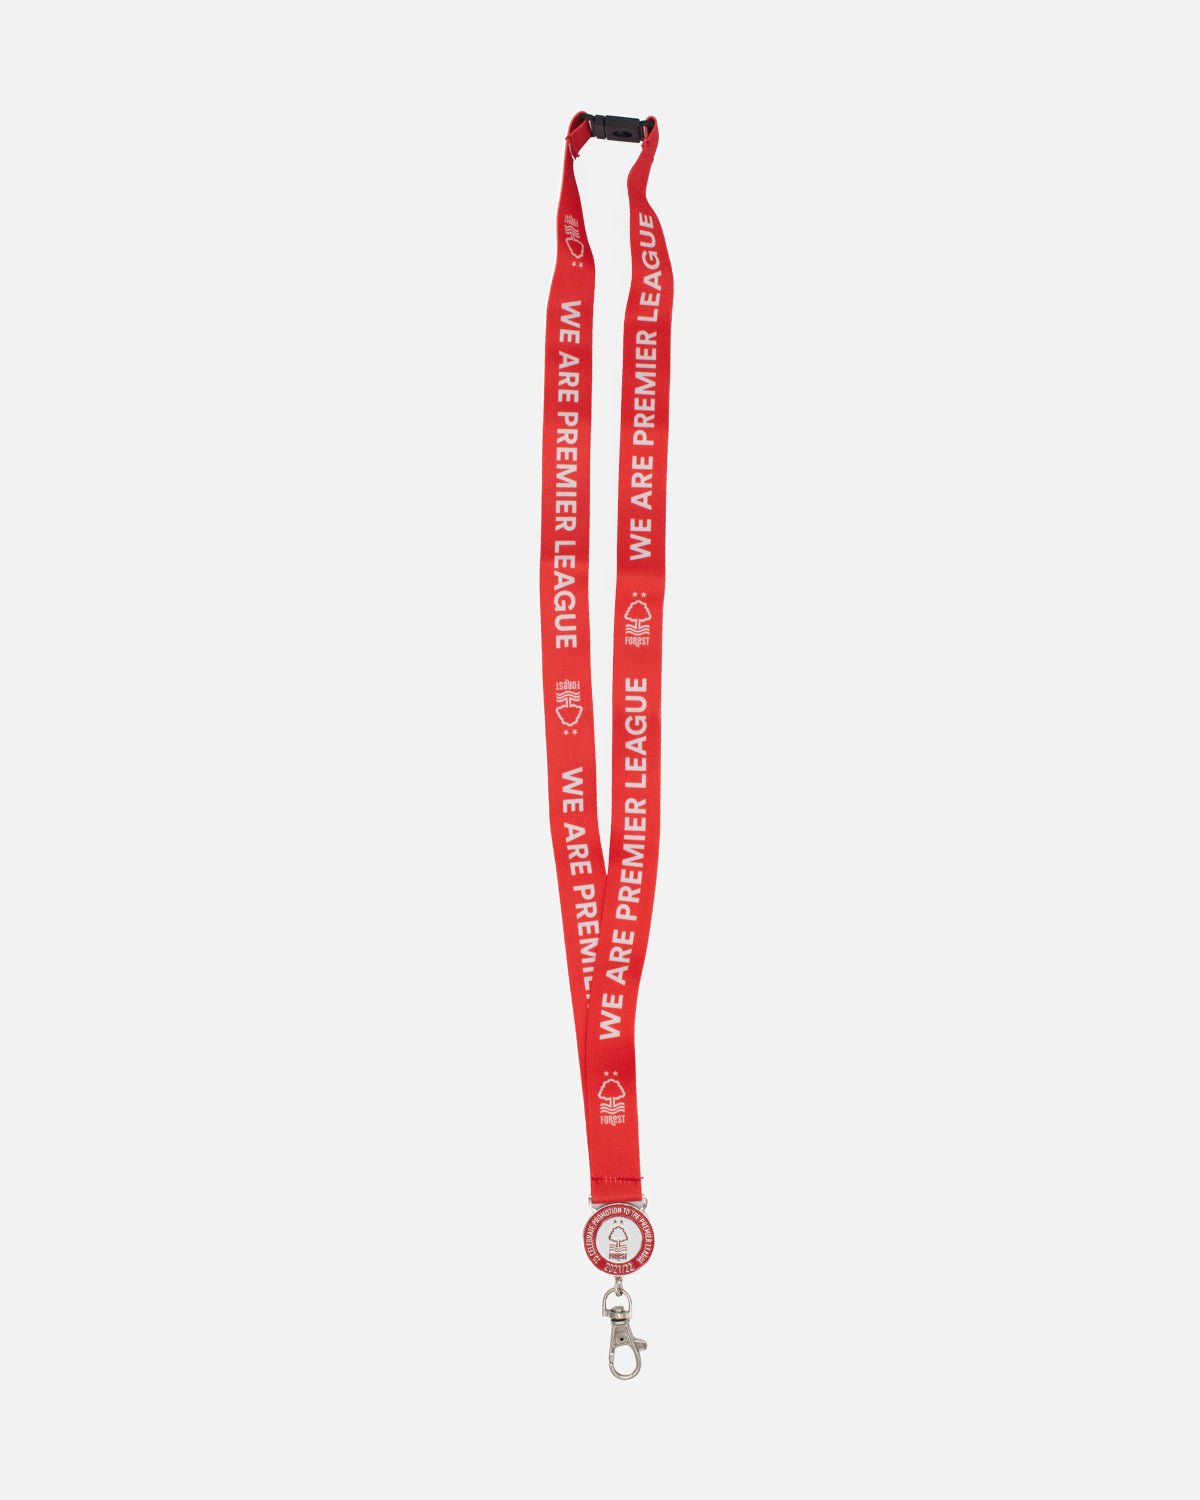 NFFC We Are Premier League Lanyard - Nottingham Forest FC